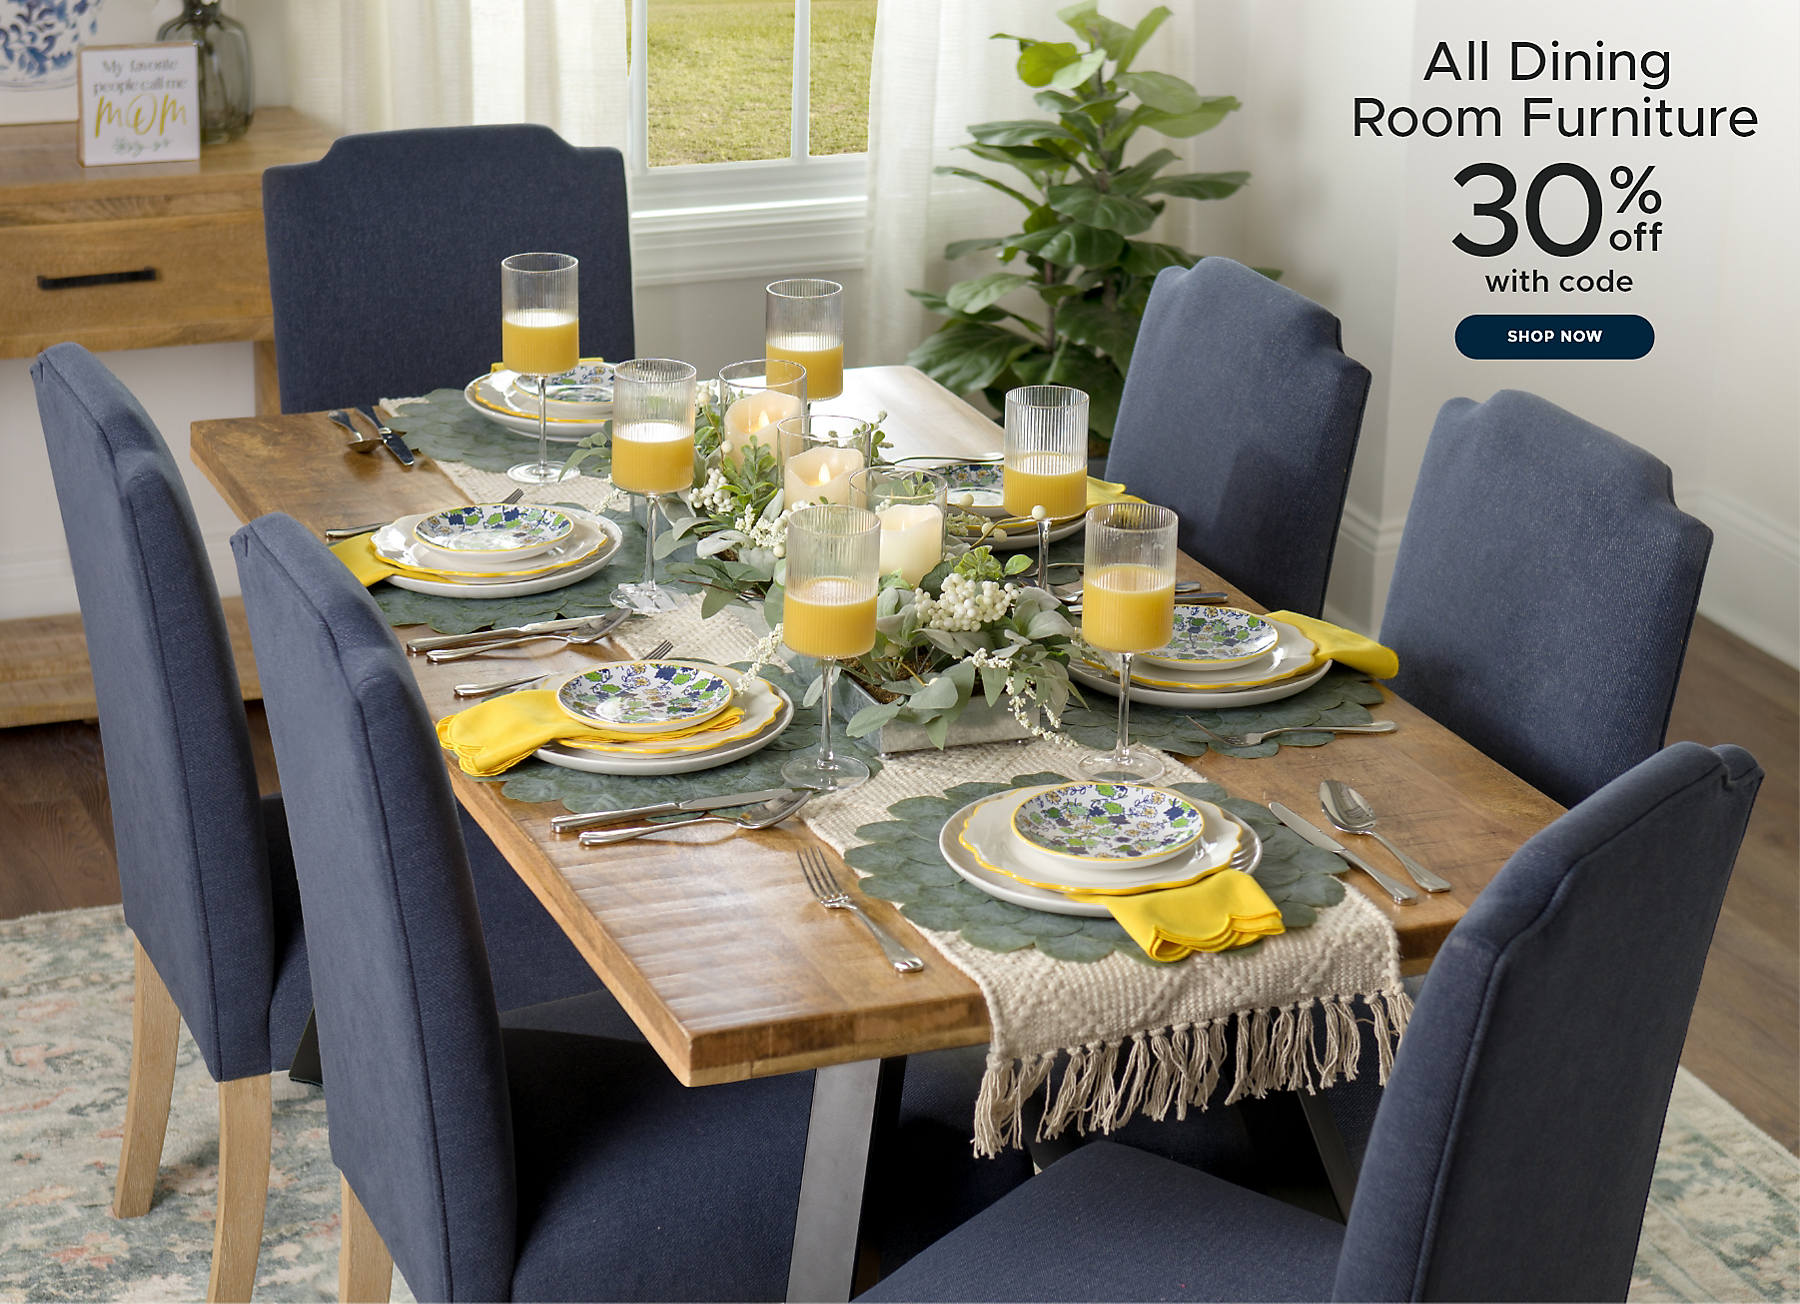 All Dining Room Furniture 30% off with code shop now